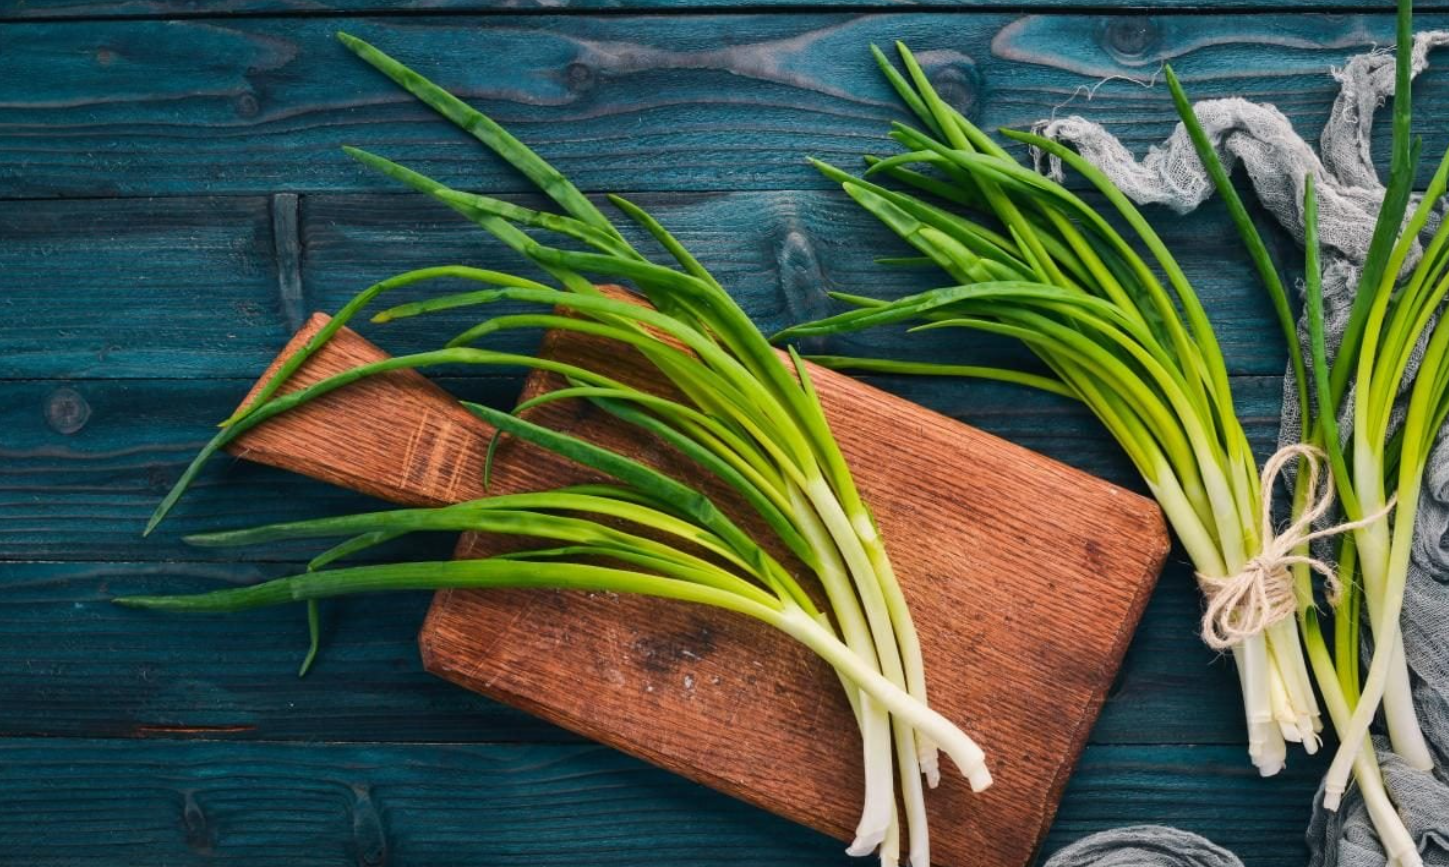 How to salt green onions in jars